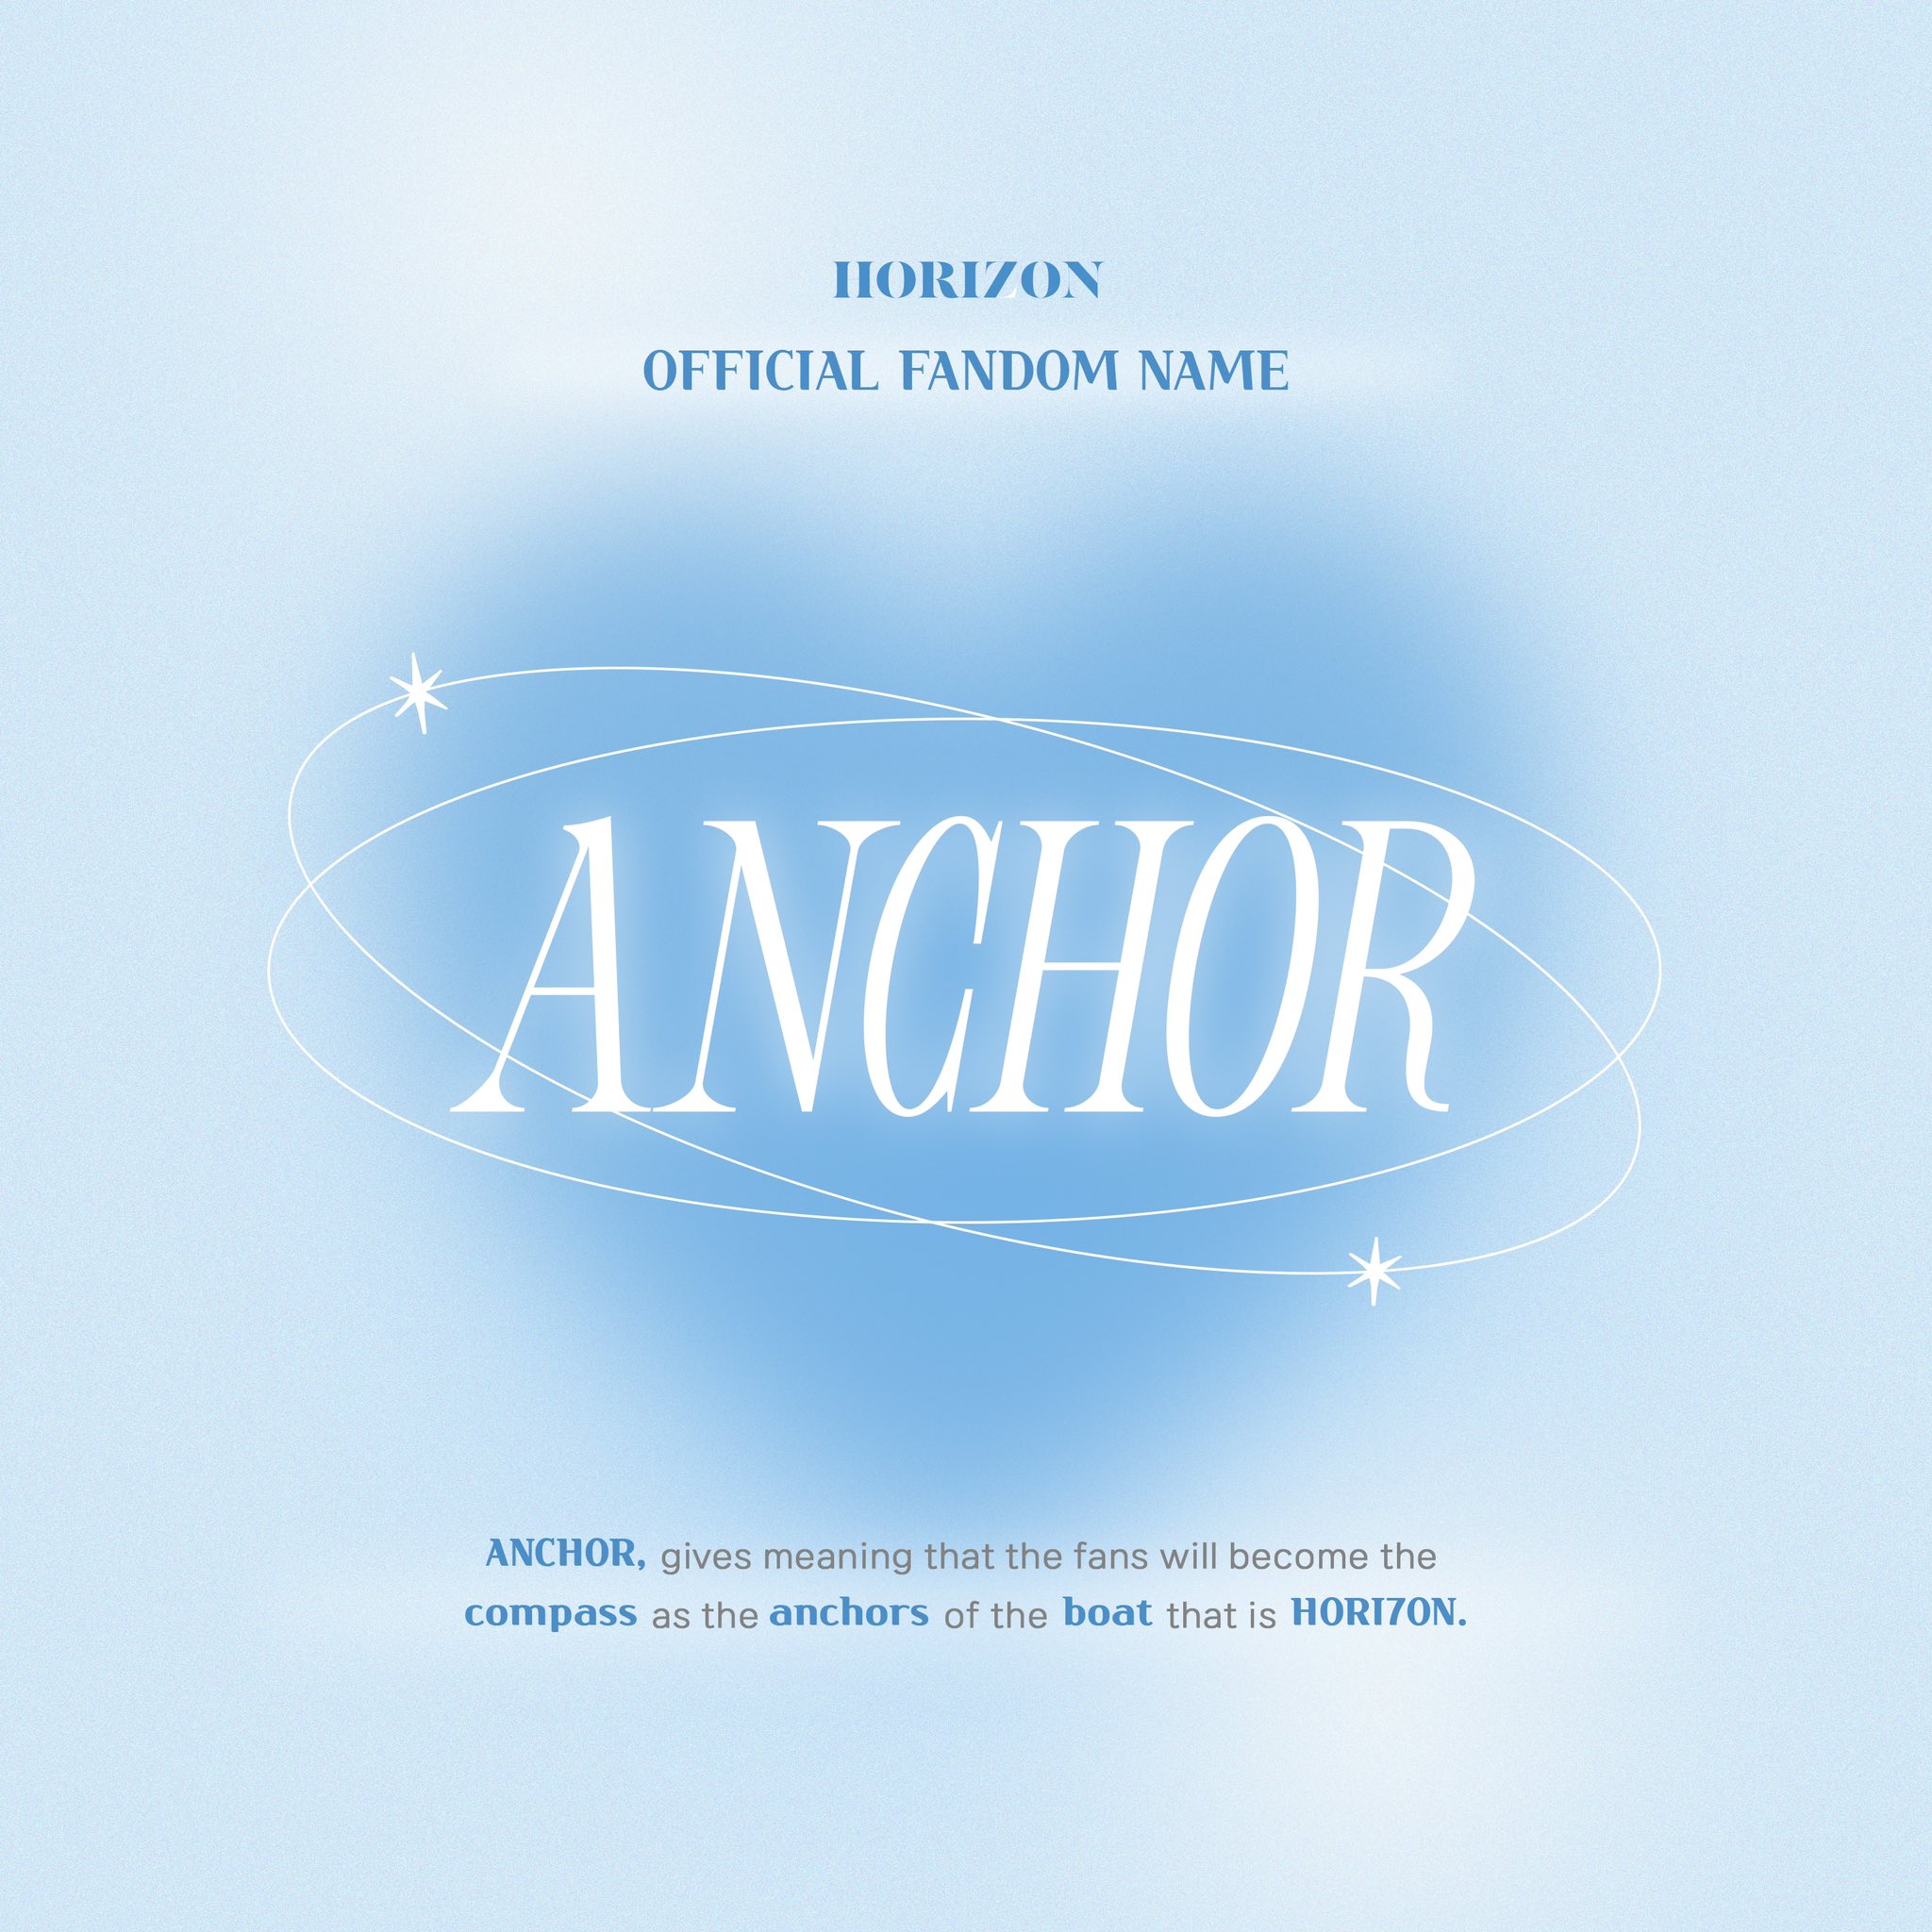 HORI7ON official fandom name is Anchor